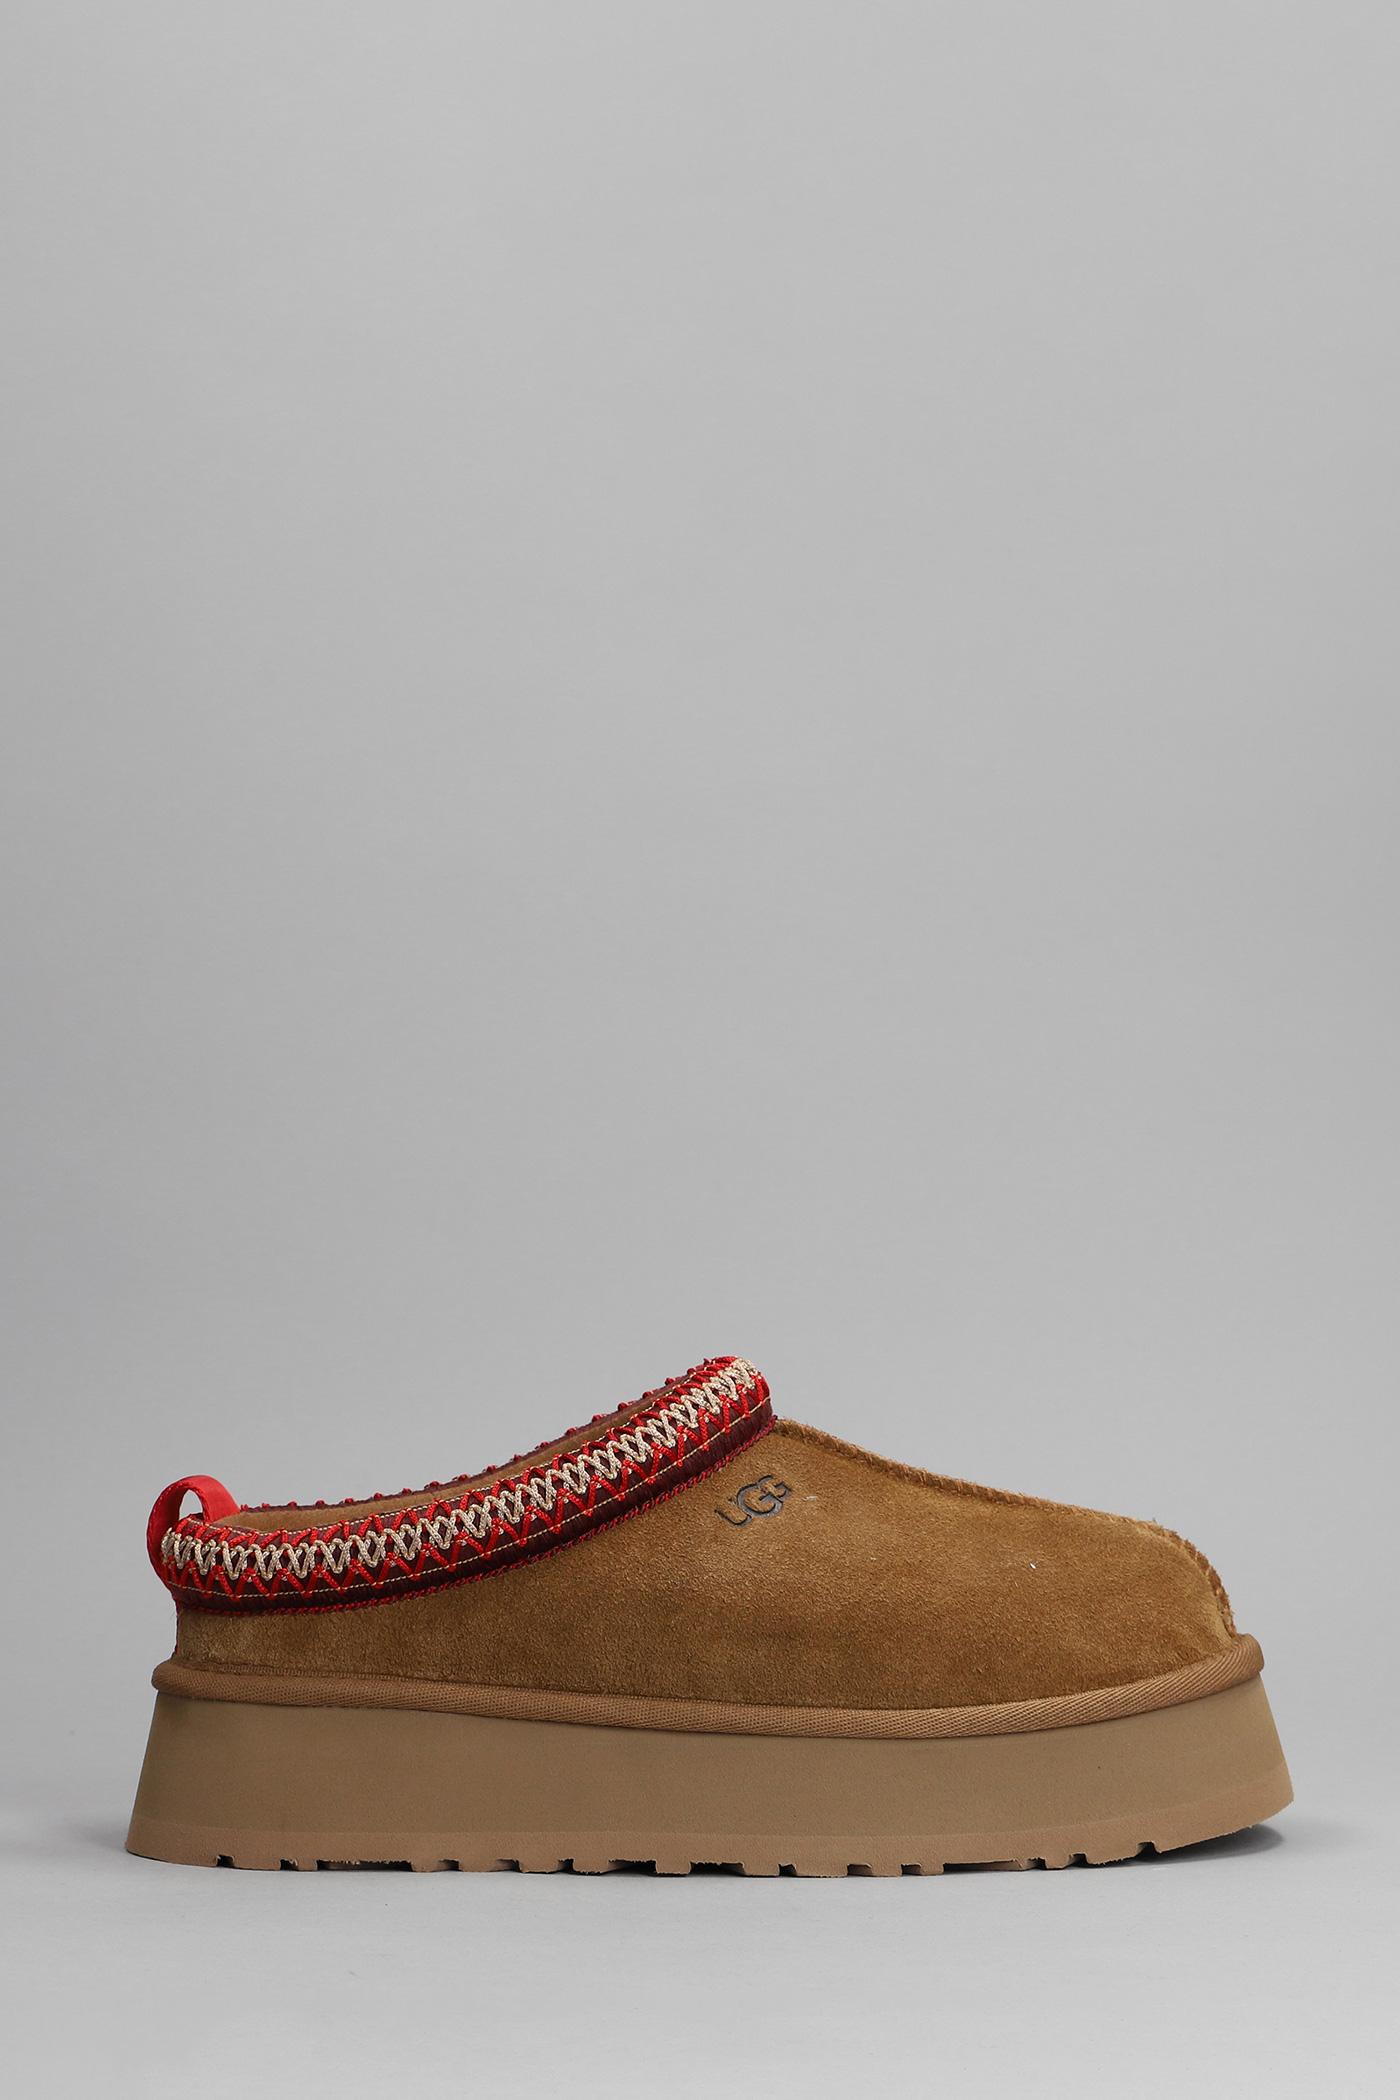 UGG Tazz Slipper-mule In Leather Color Suede in Brown | Lyst